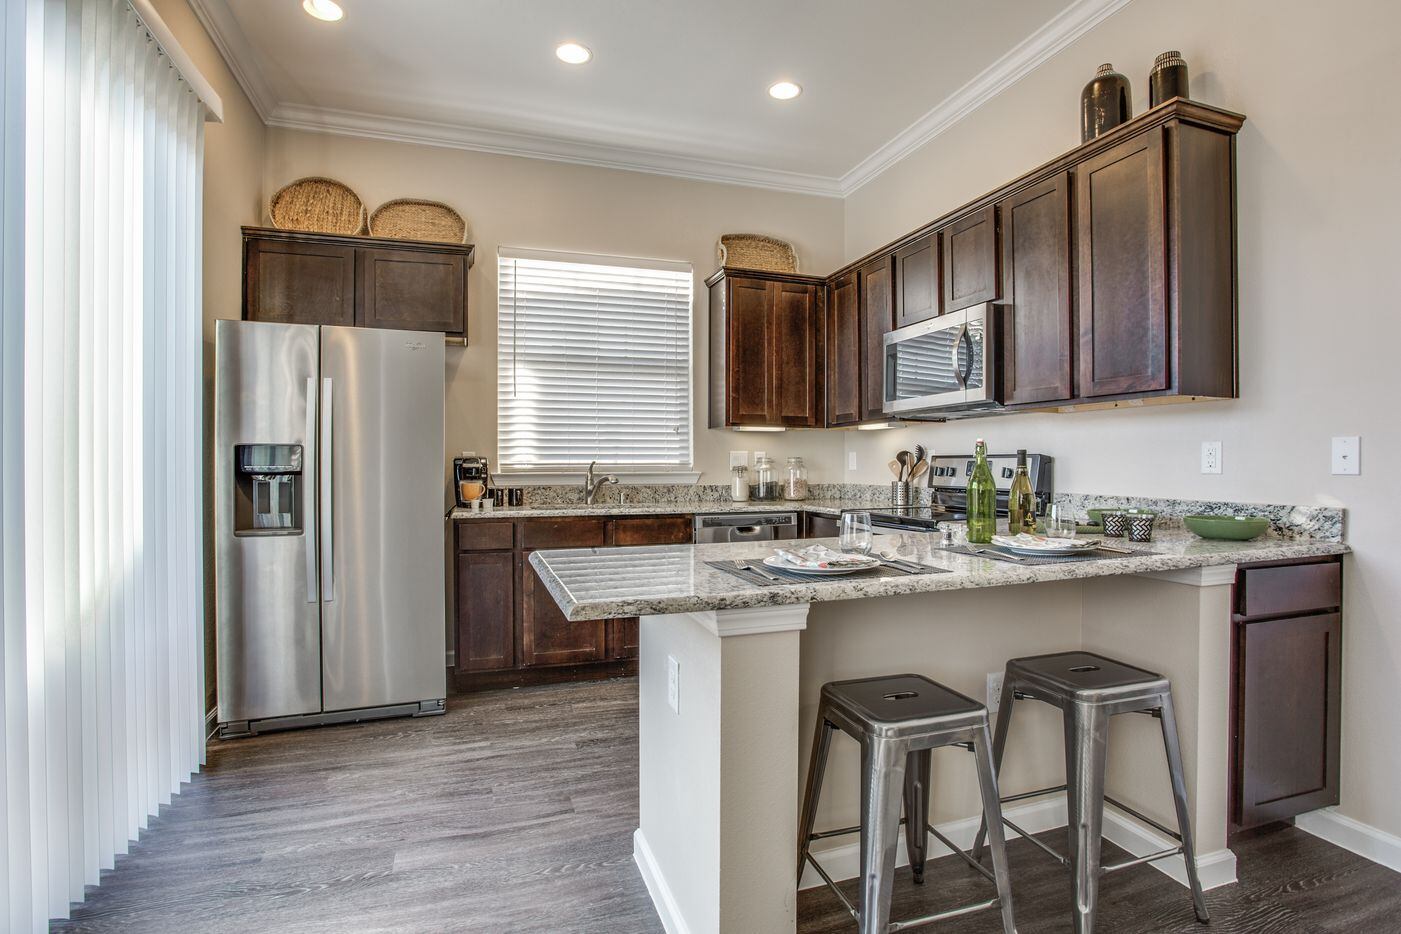 NexMetro Communities' first locations are in Plano and McKinney.